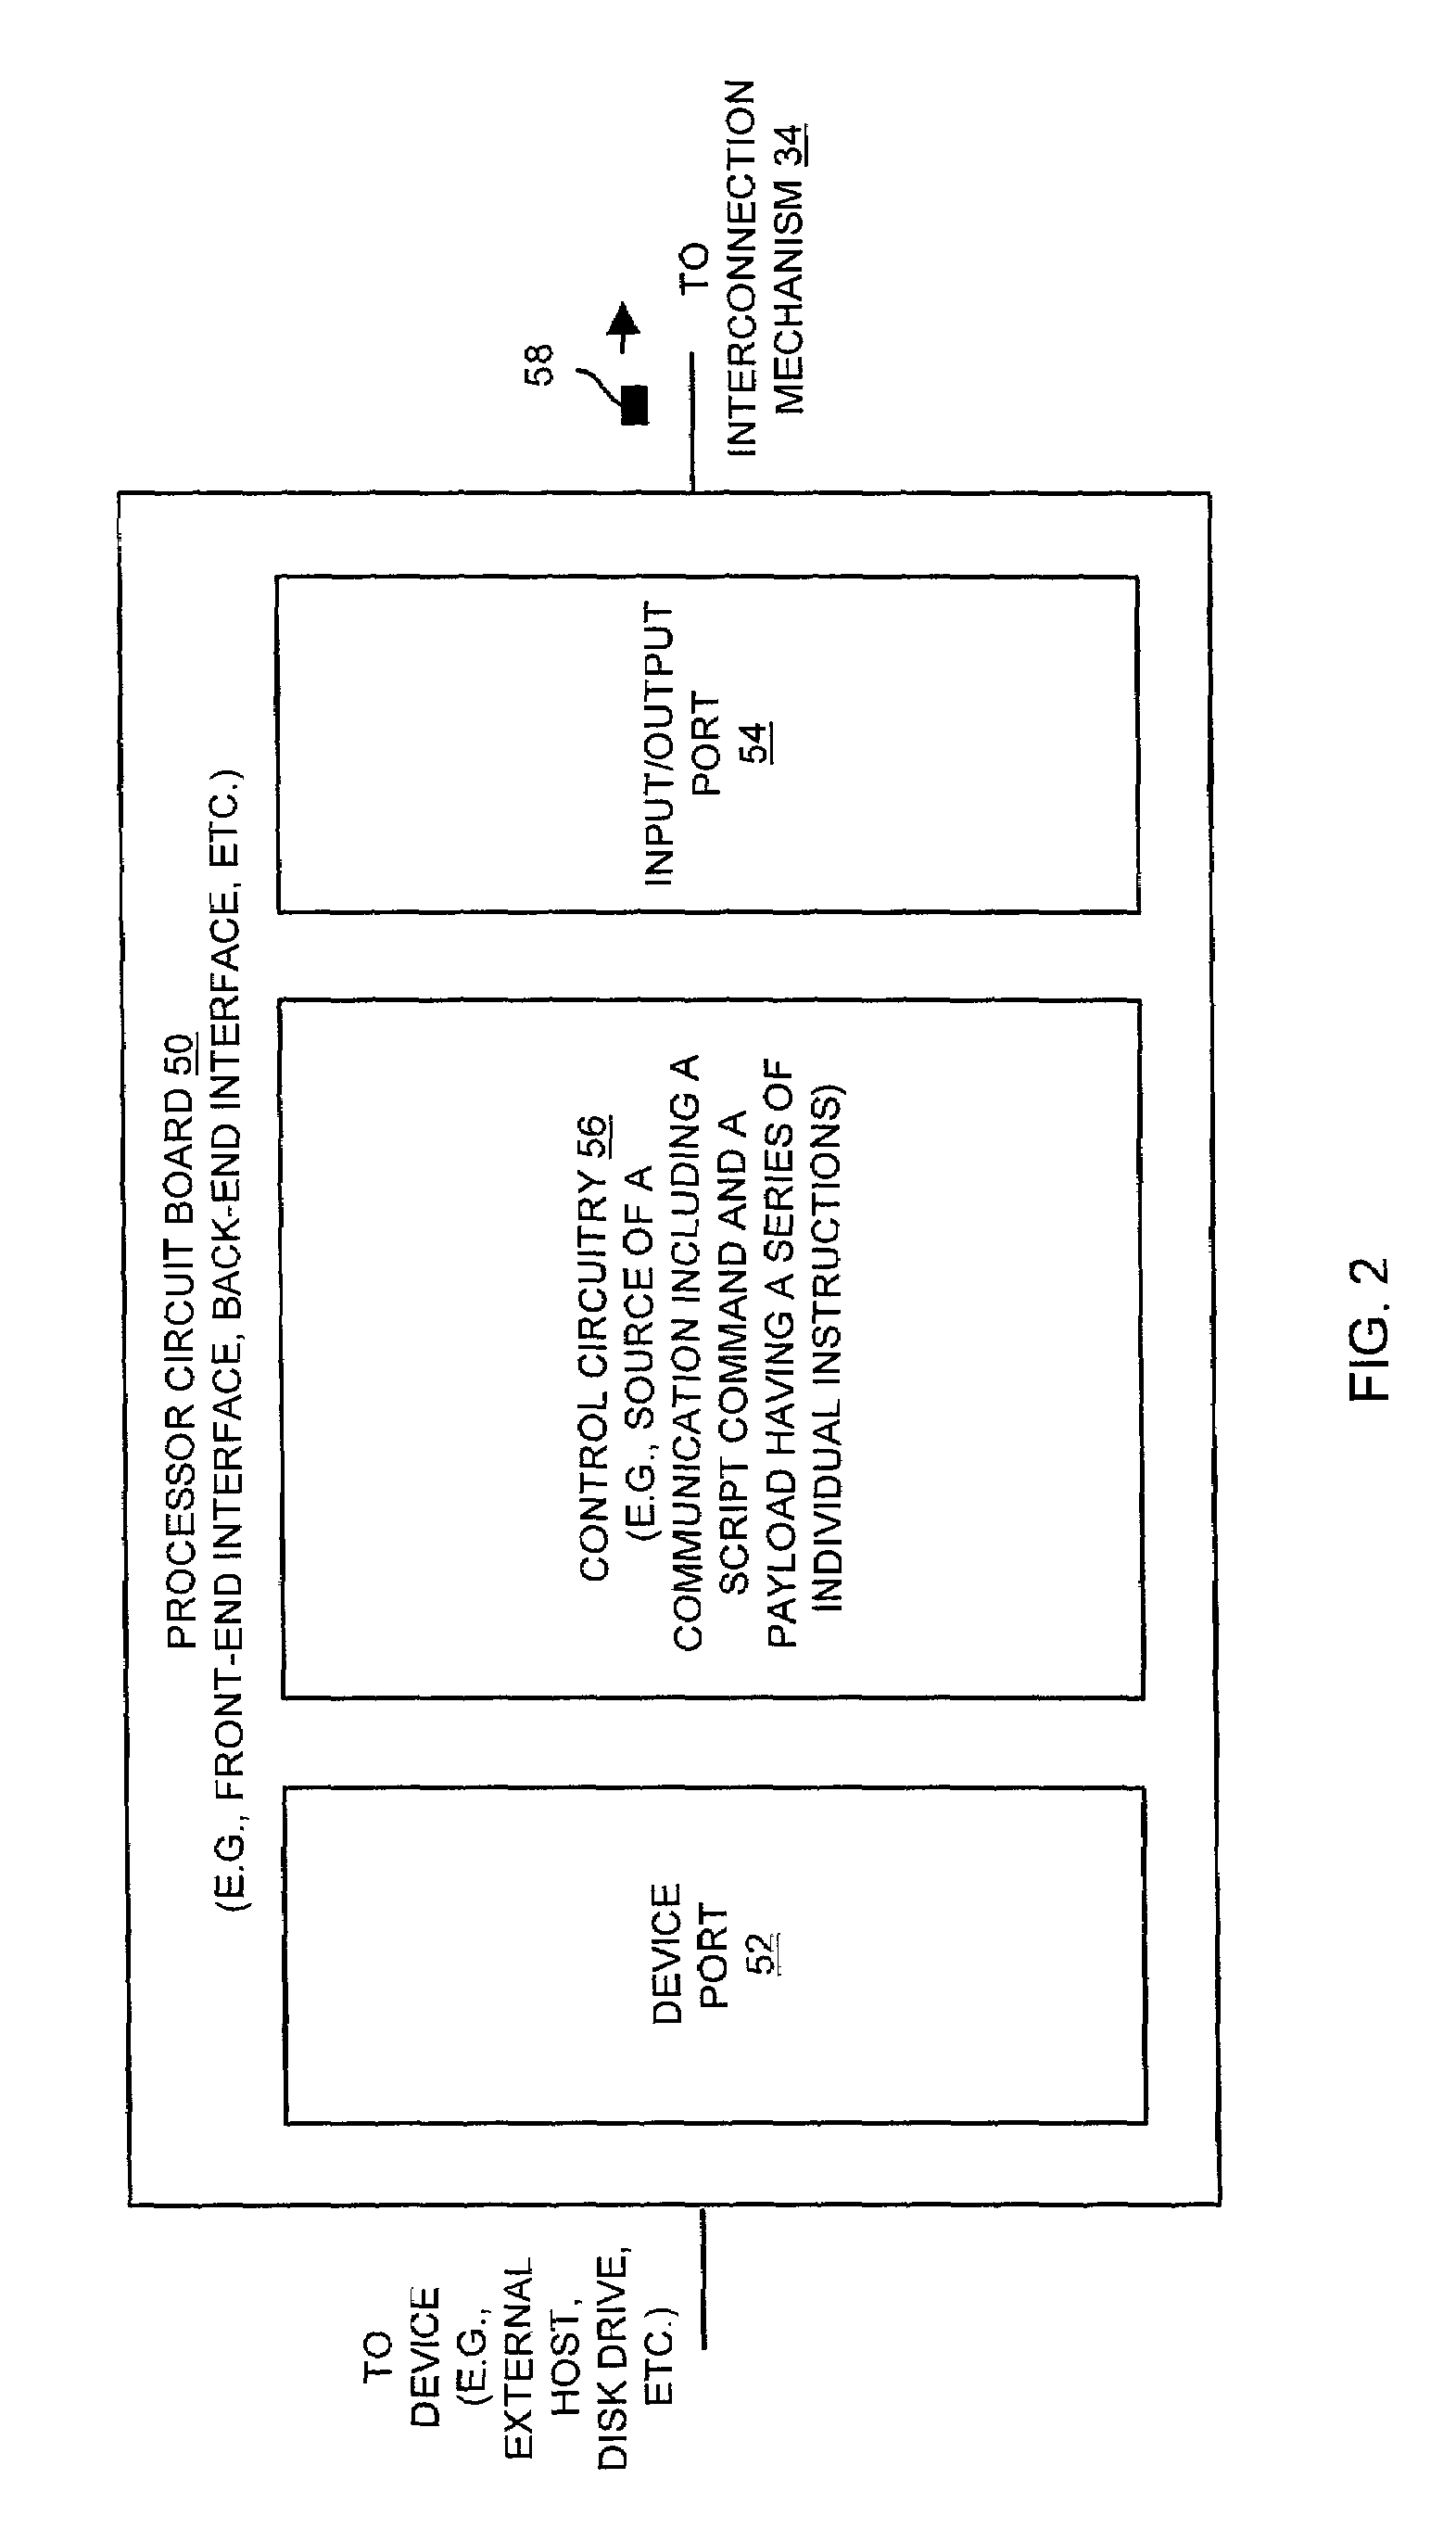 Data storage system having an improved memory circuit board configured to run scripts